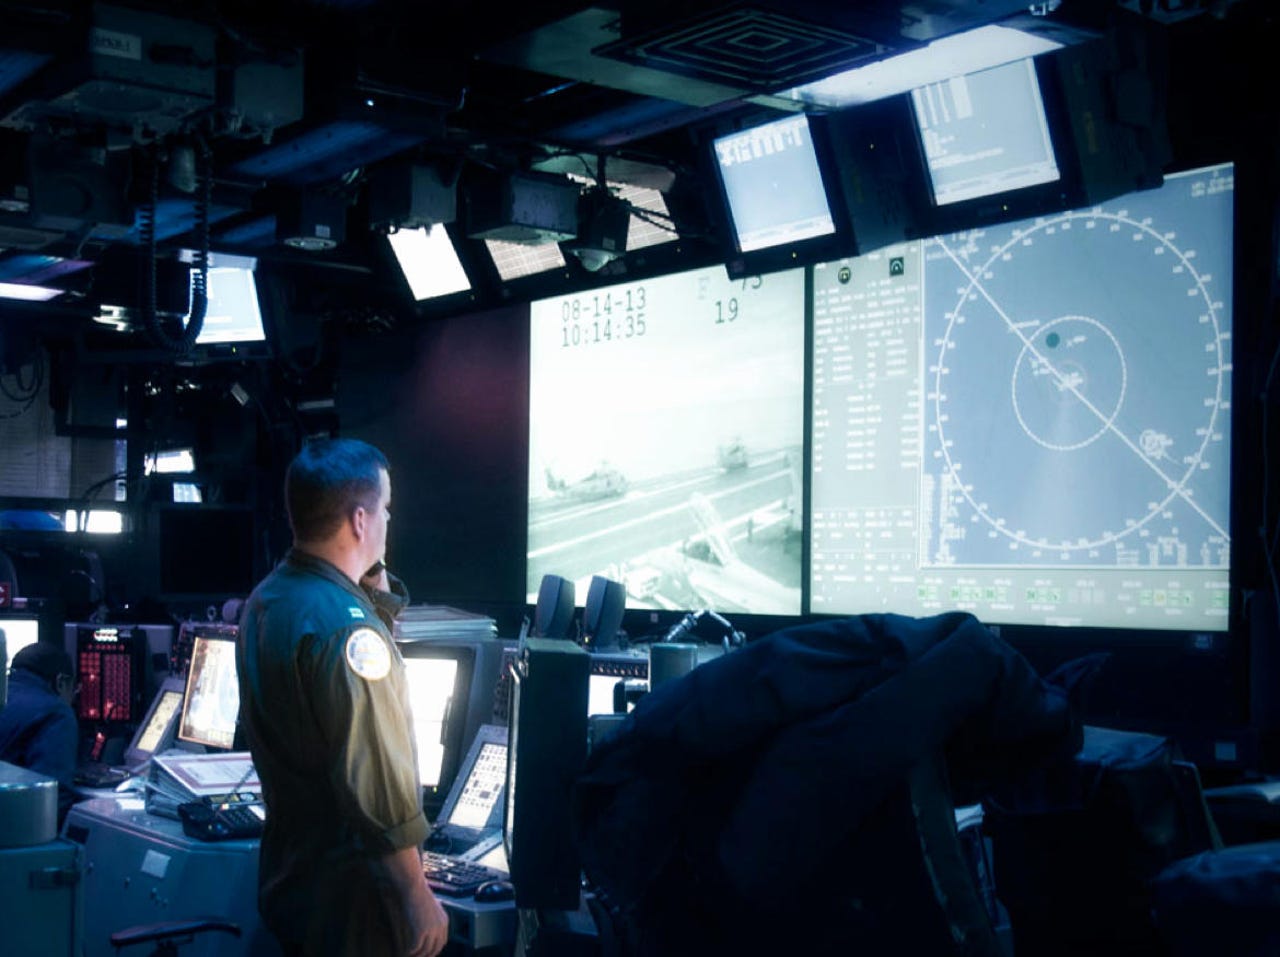 airforce member looking at a large screen in a dark command room.